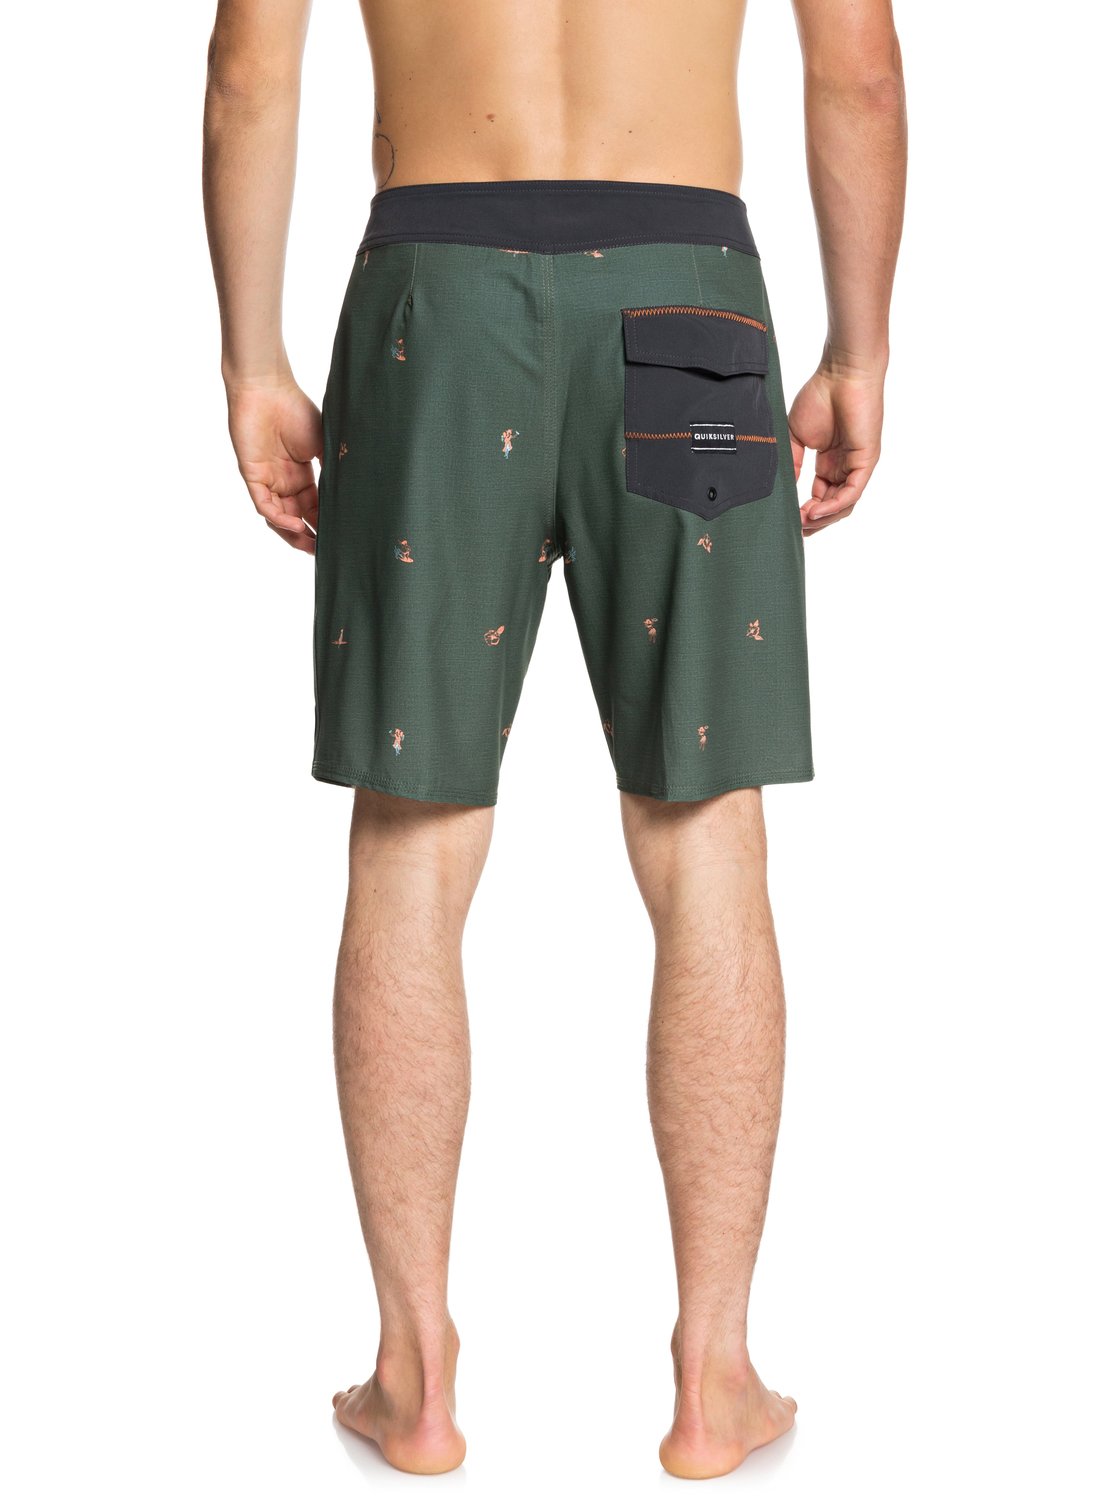 Quiksilver Highline Variable 19" Boardshorts CQY6-Green 33